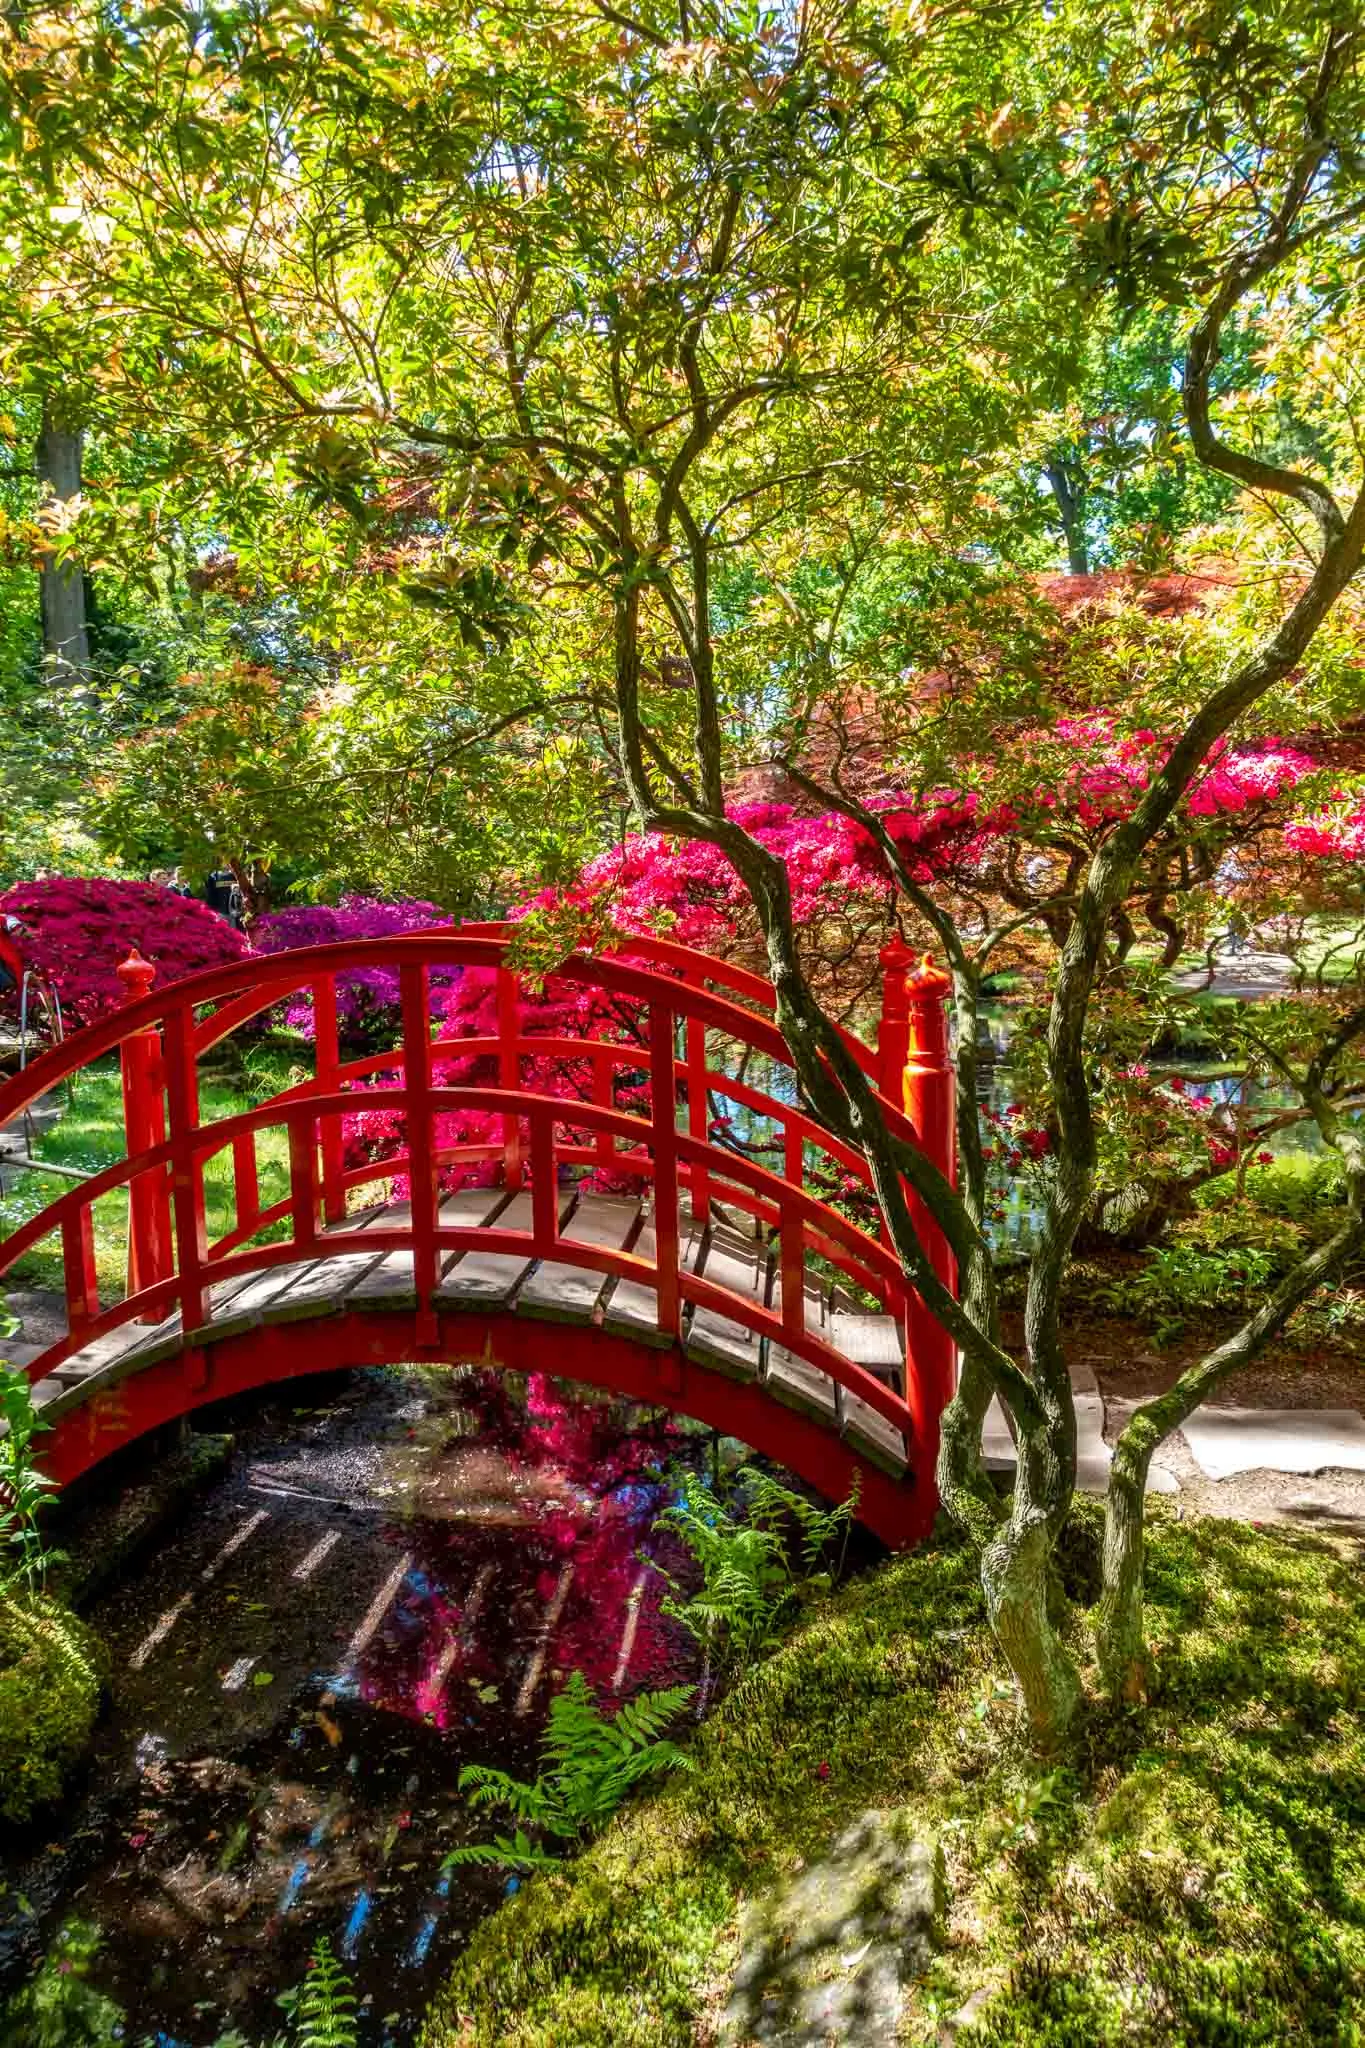 Red wooden bridge over a stream surrounded by trees and flowers